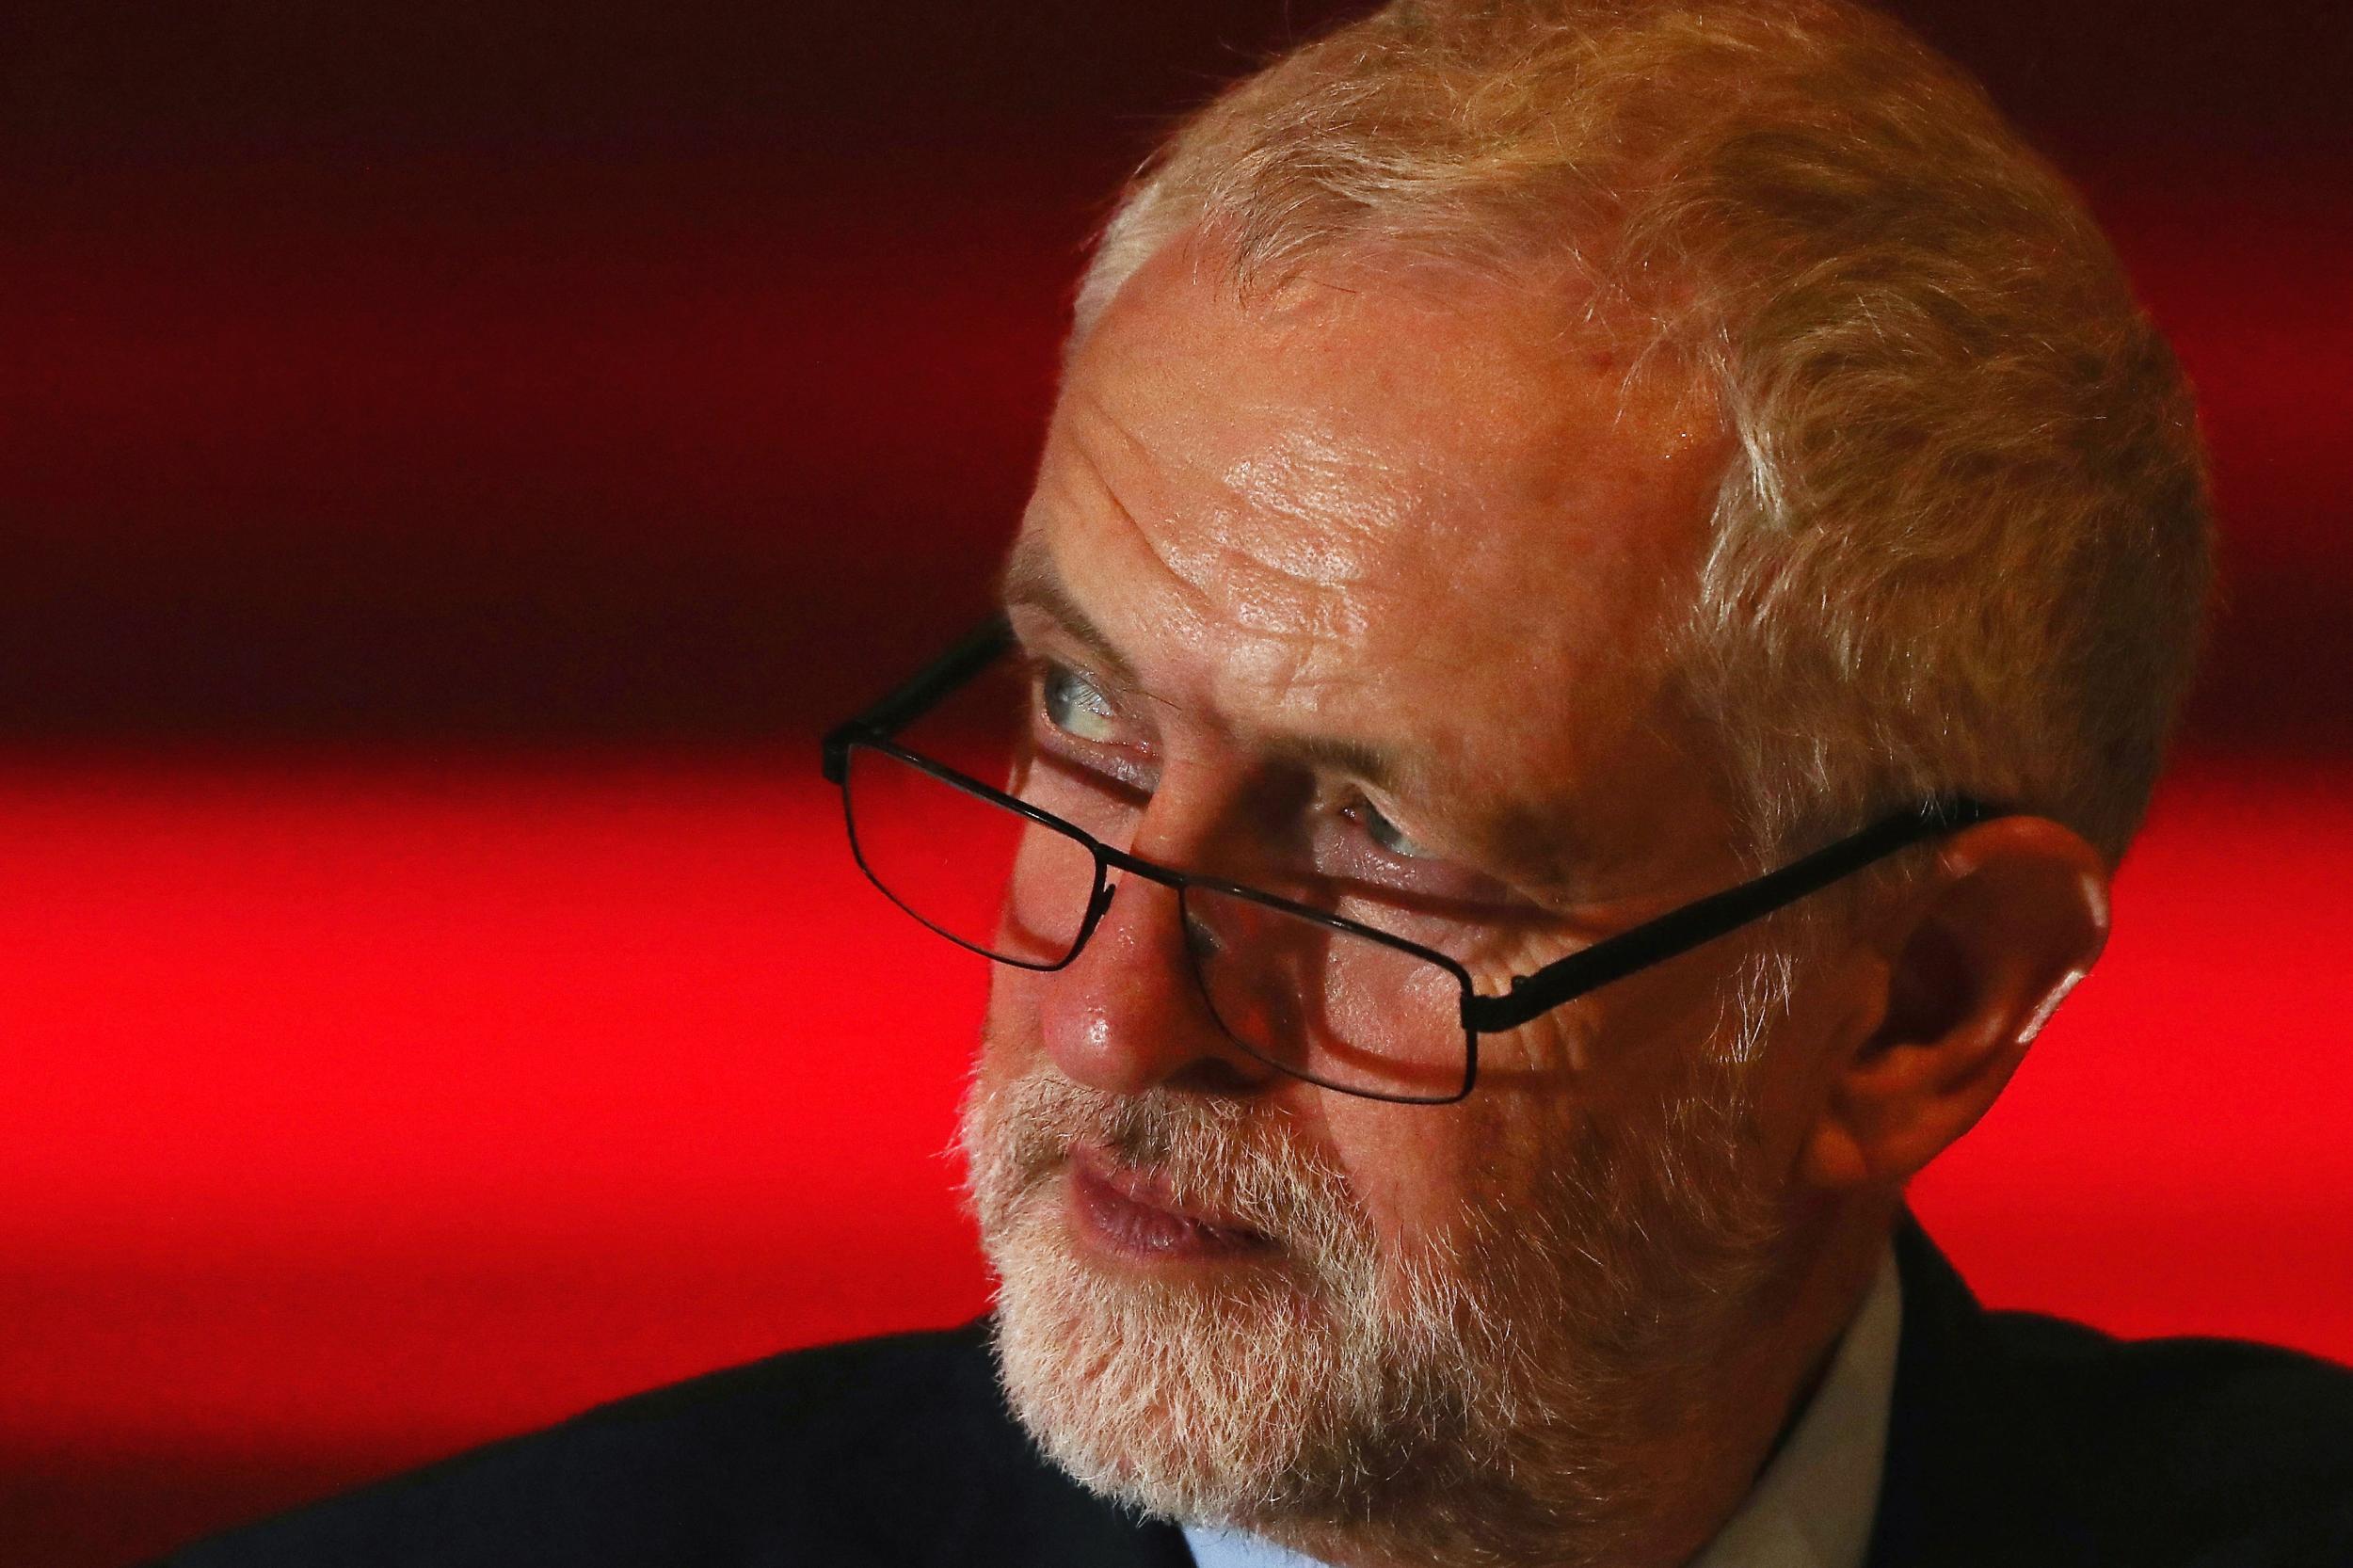 Labour leader Jeremy Corbyn needs to be ready for a time when voters may recoil from the Tories’ economic mess